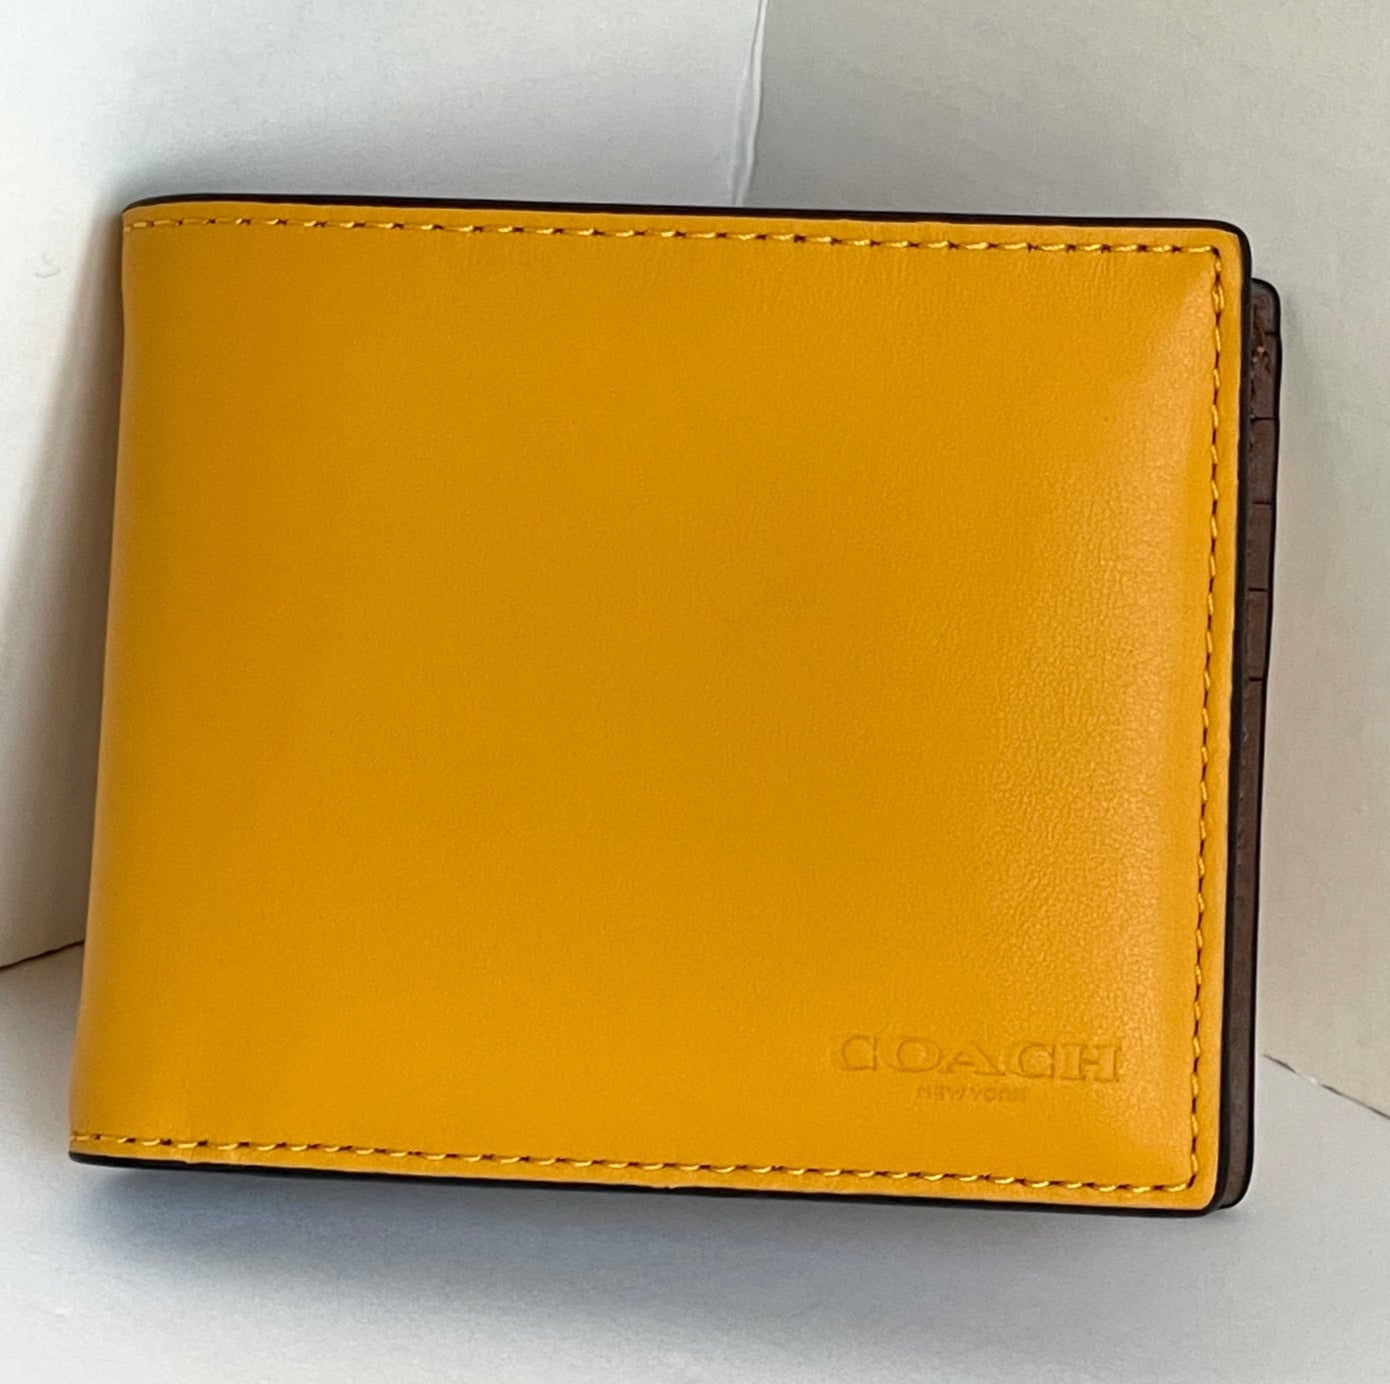 Coach Mens Leather Wallet